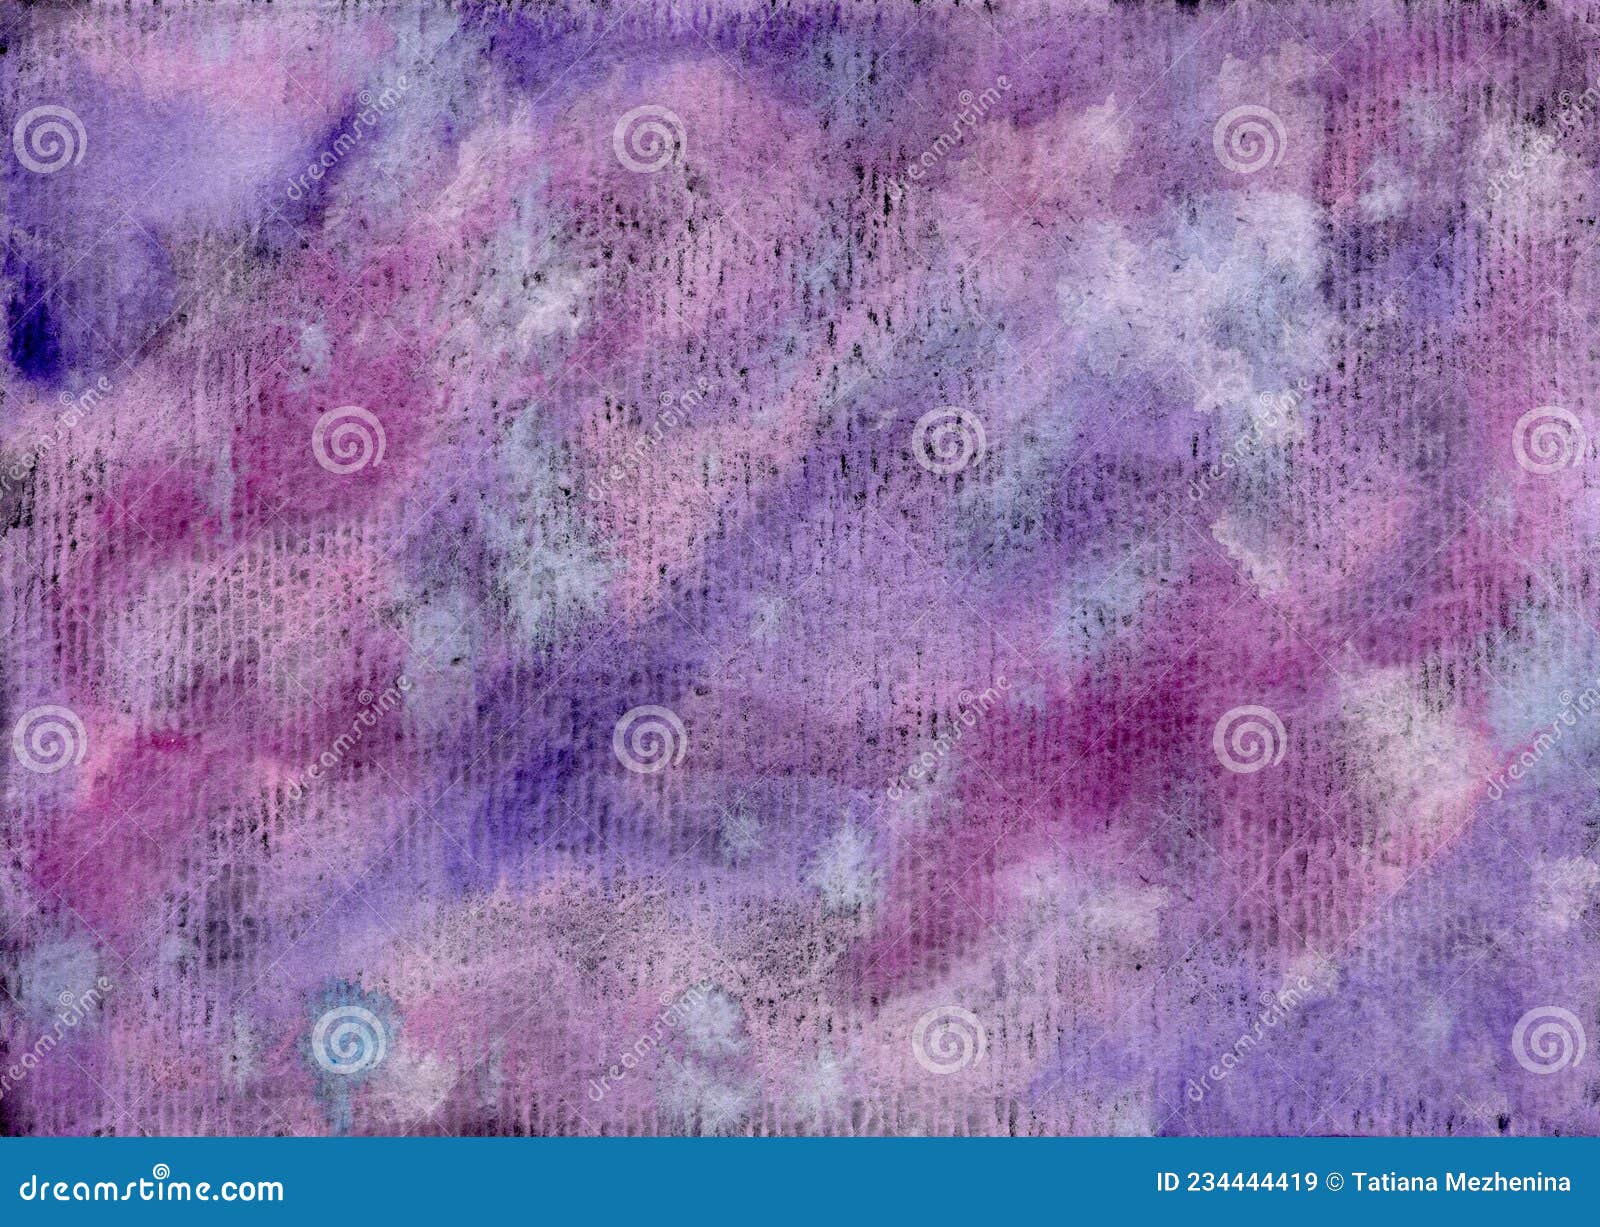 Expressive Blue and Purple Watercolor Background Stock Image - Image of ...